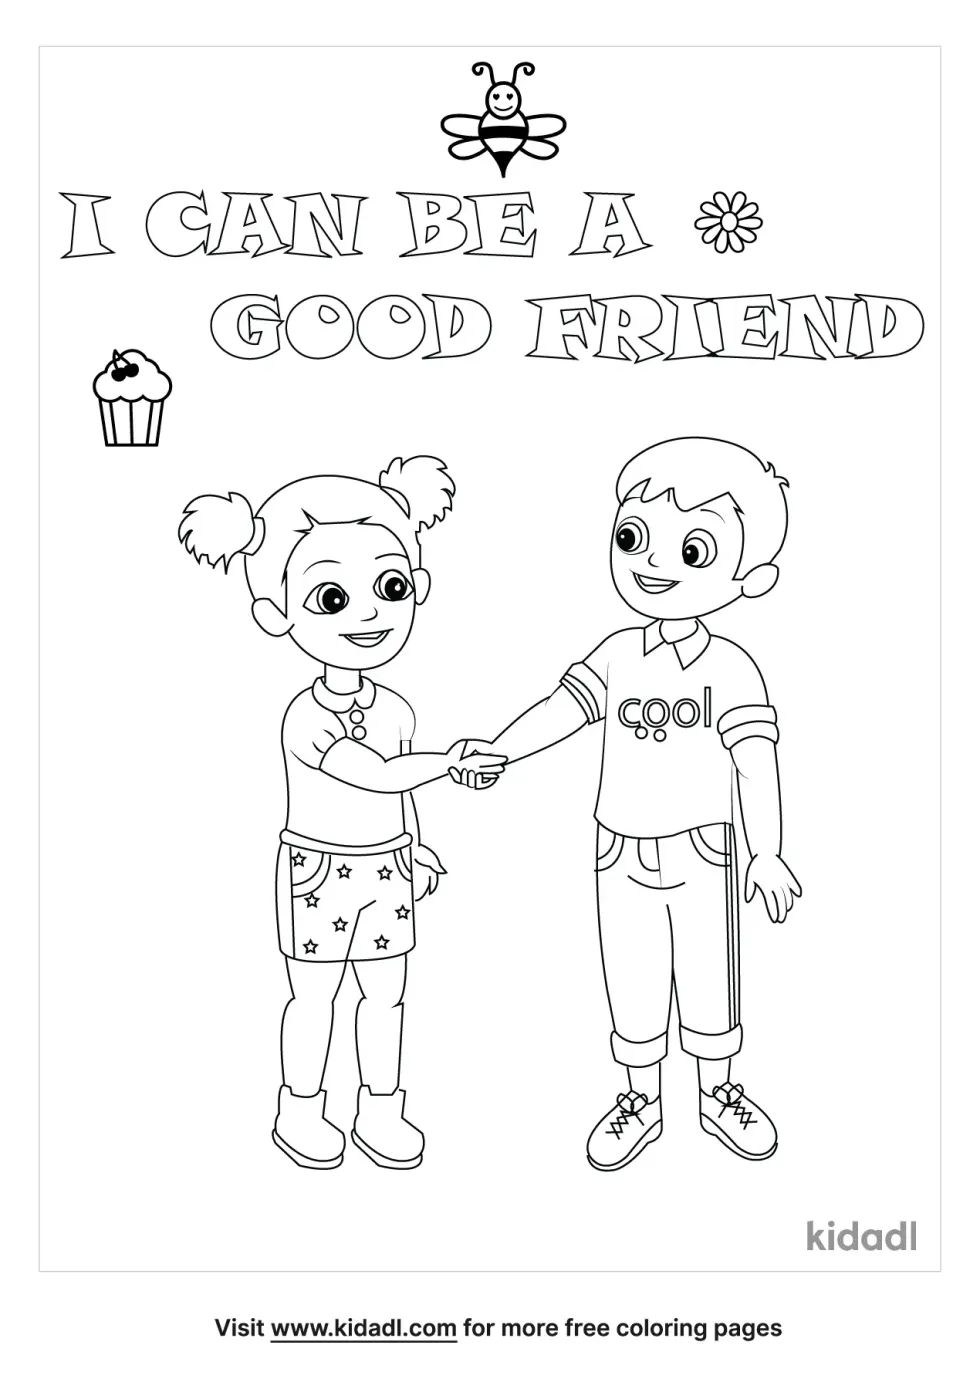 I Can Be A Good Friend Coloring Page